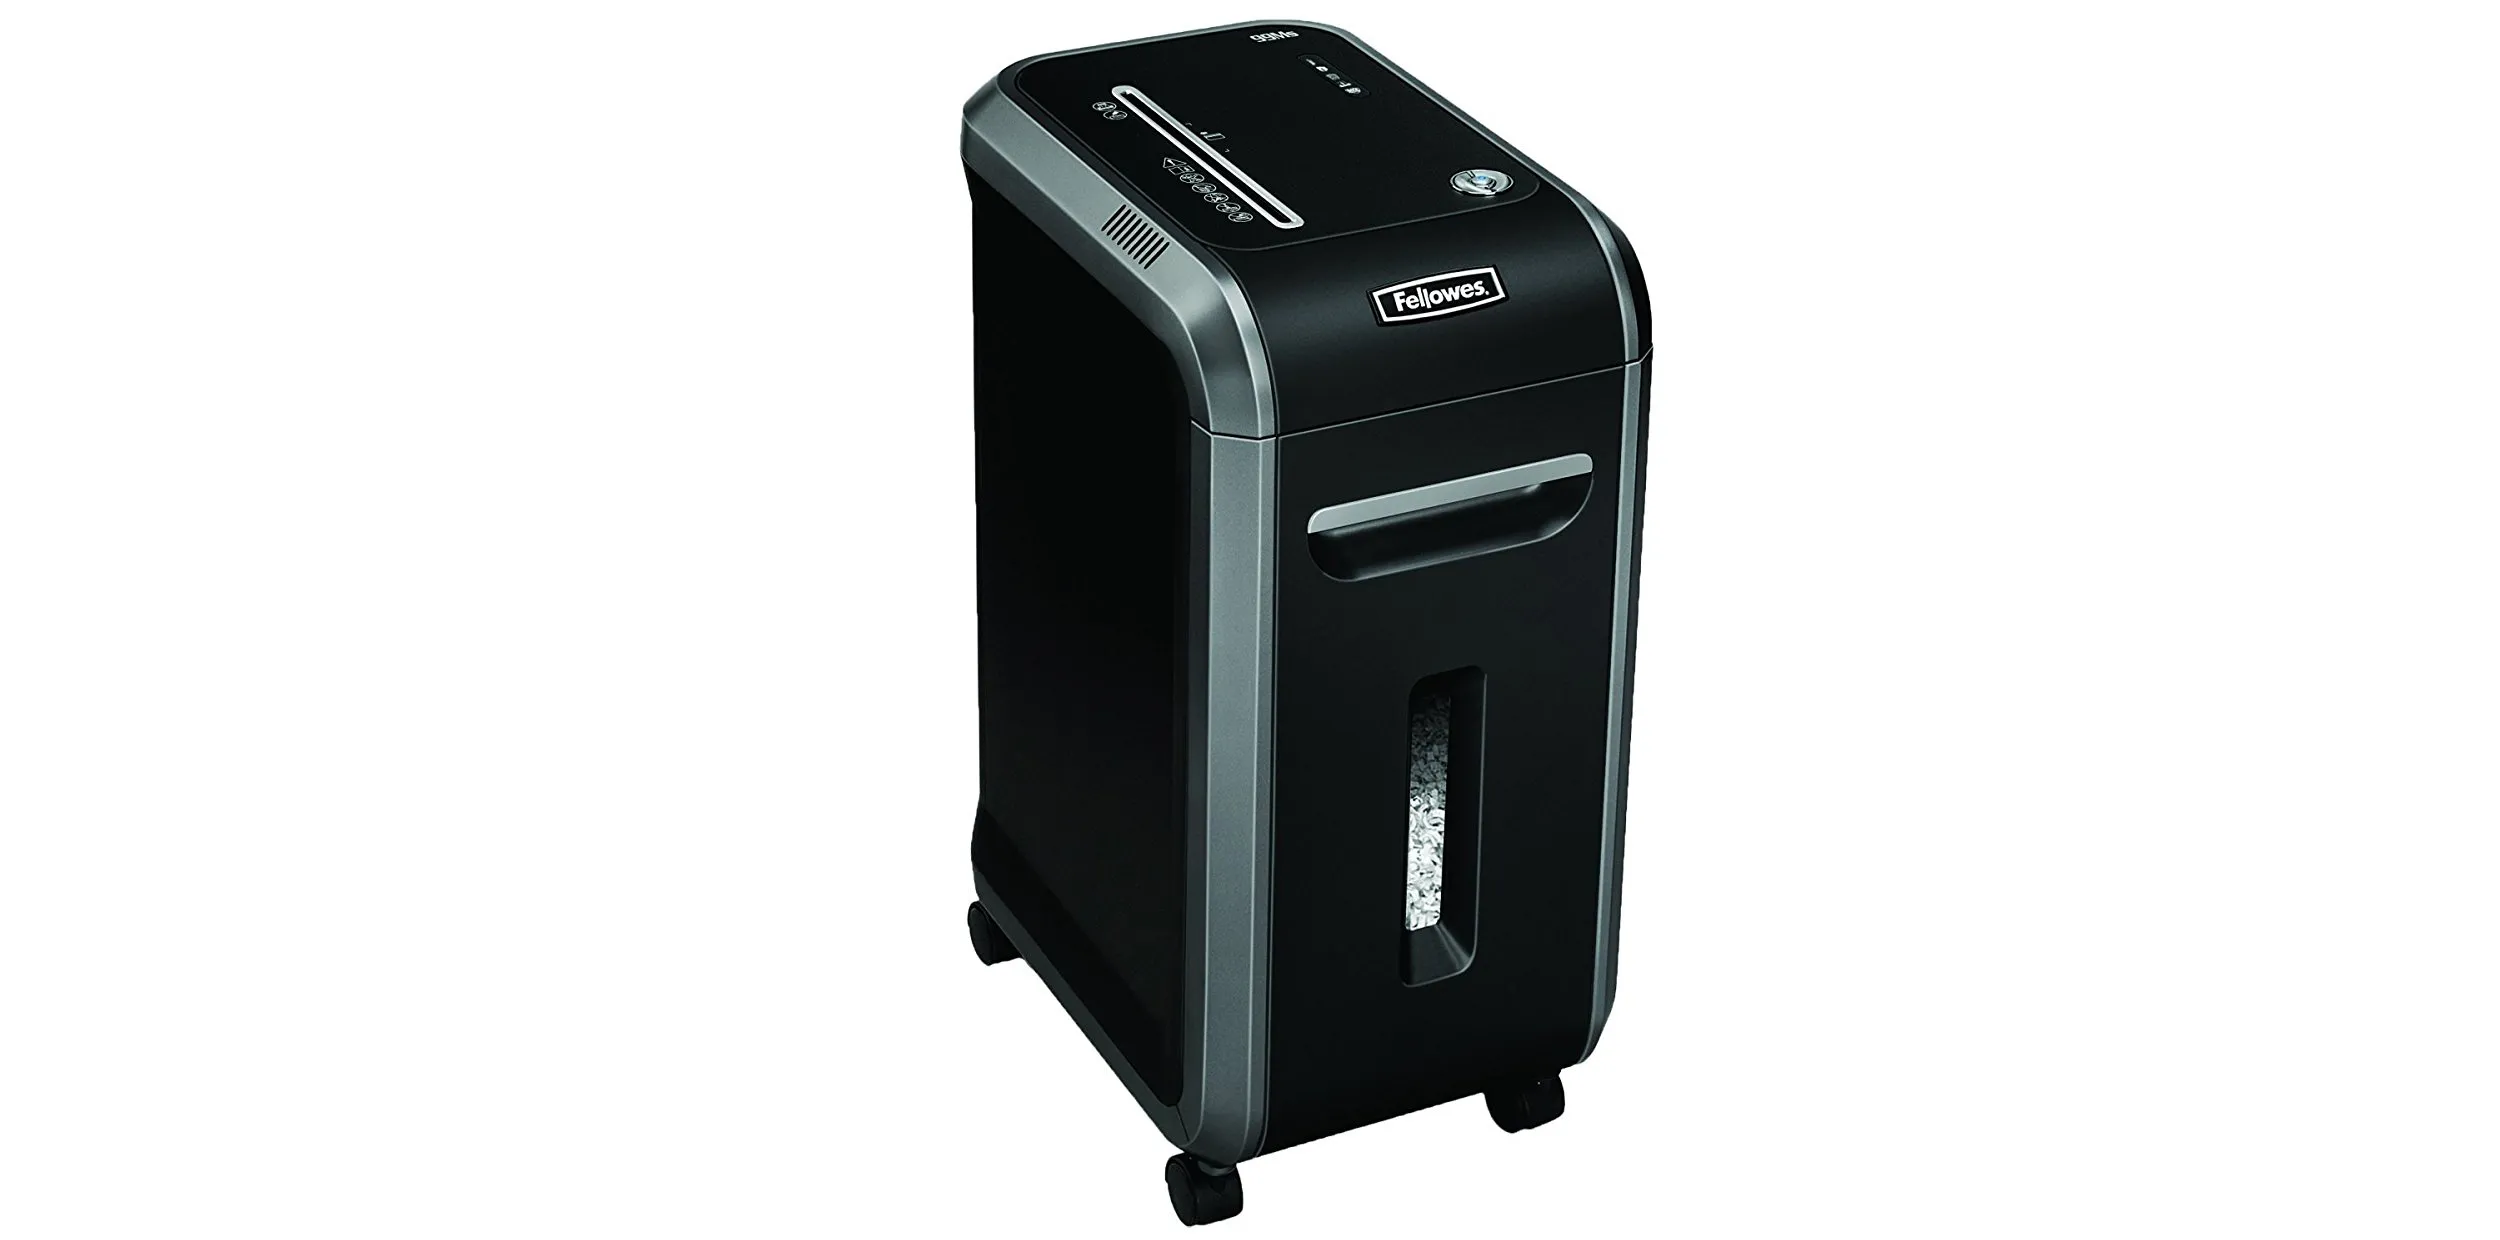 Recensione Fellowes 99MS